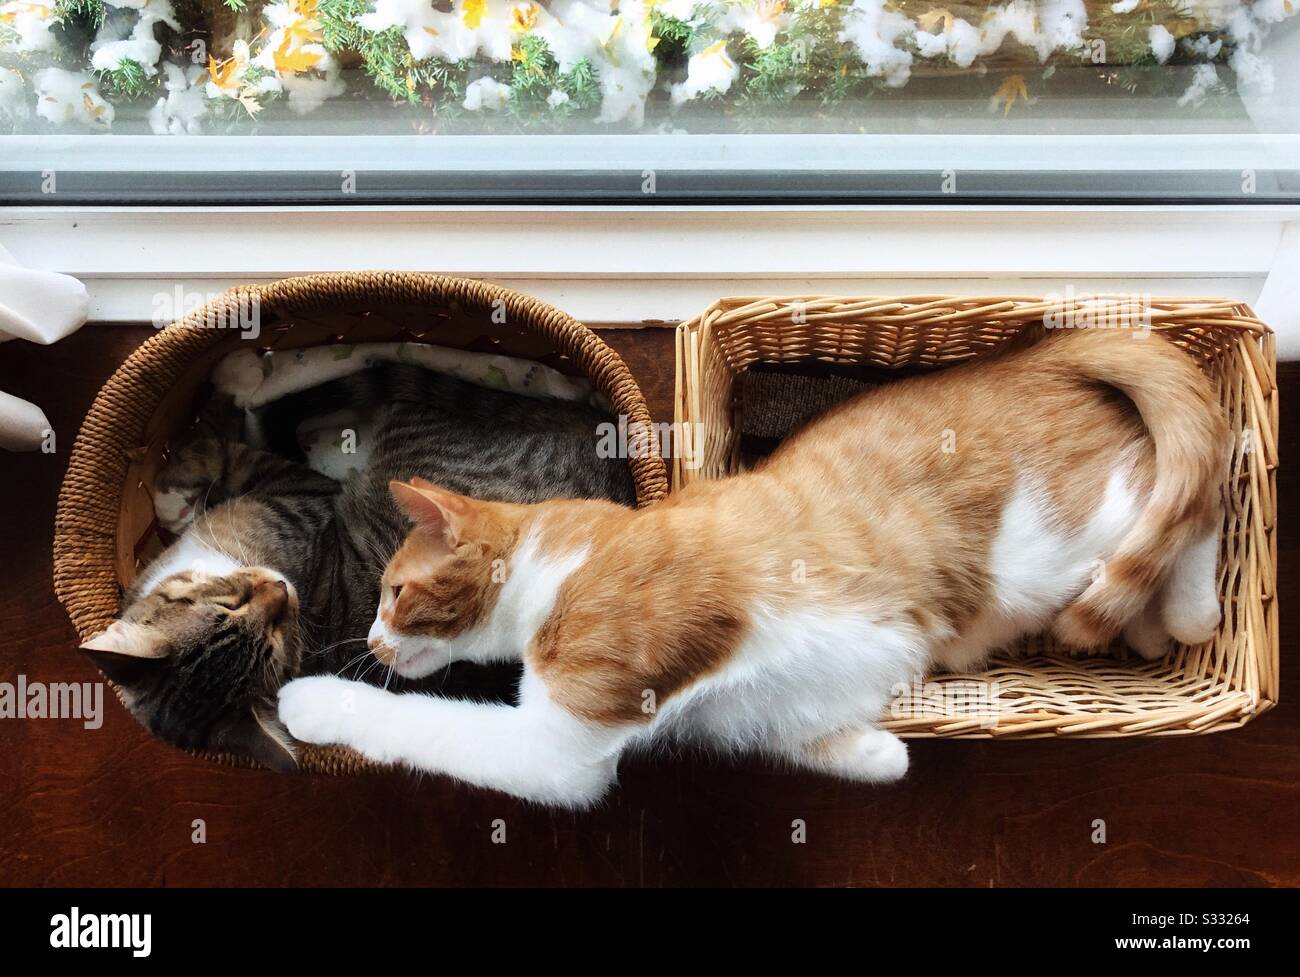 Two tabby cats in baskets on window ledge showing nap time affection. Stock Photo